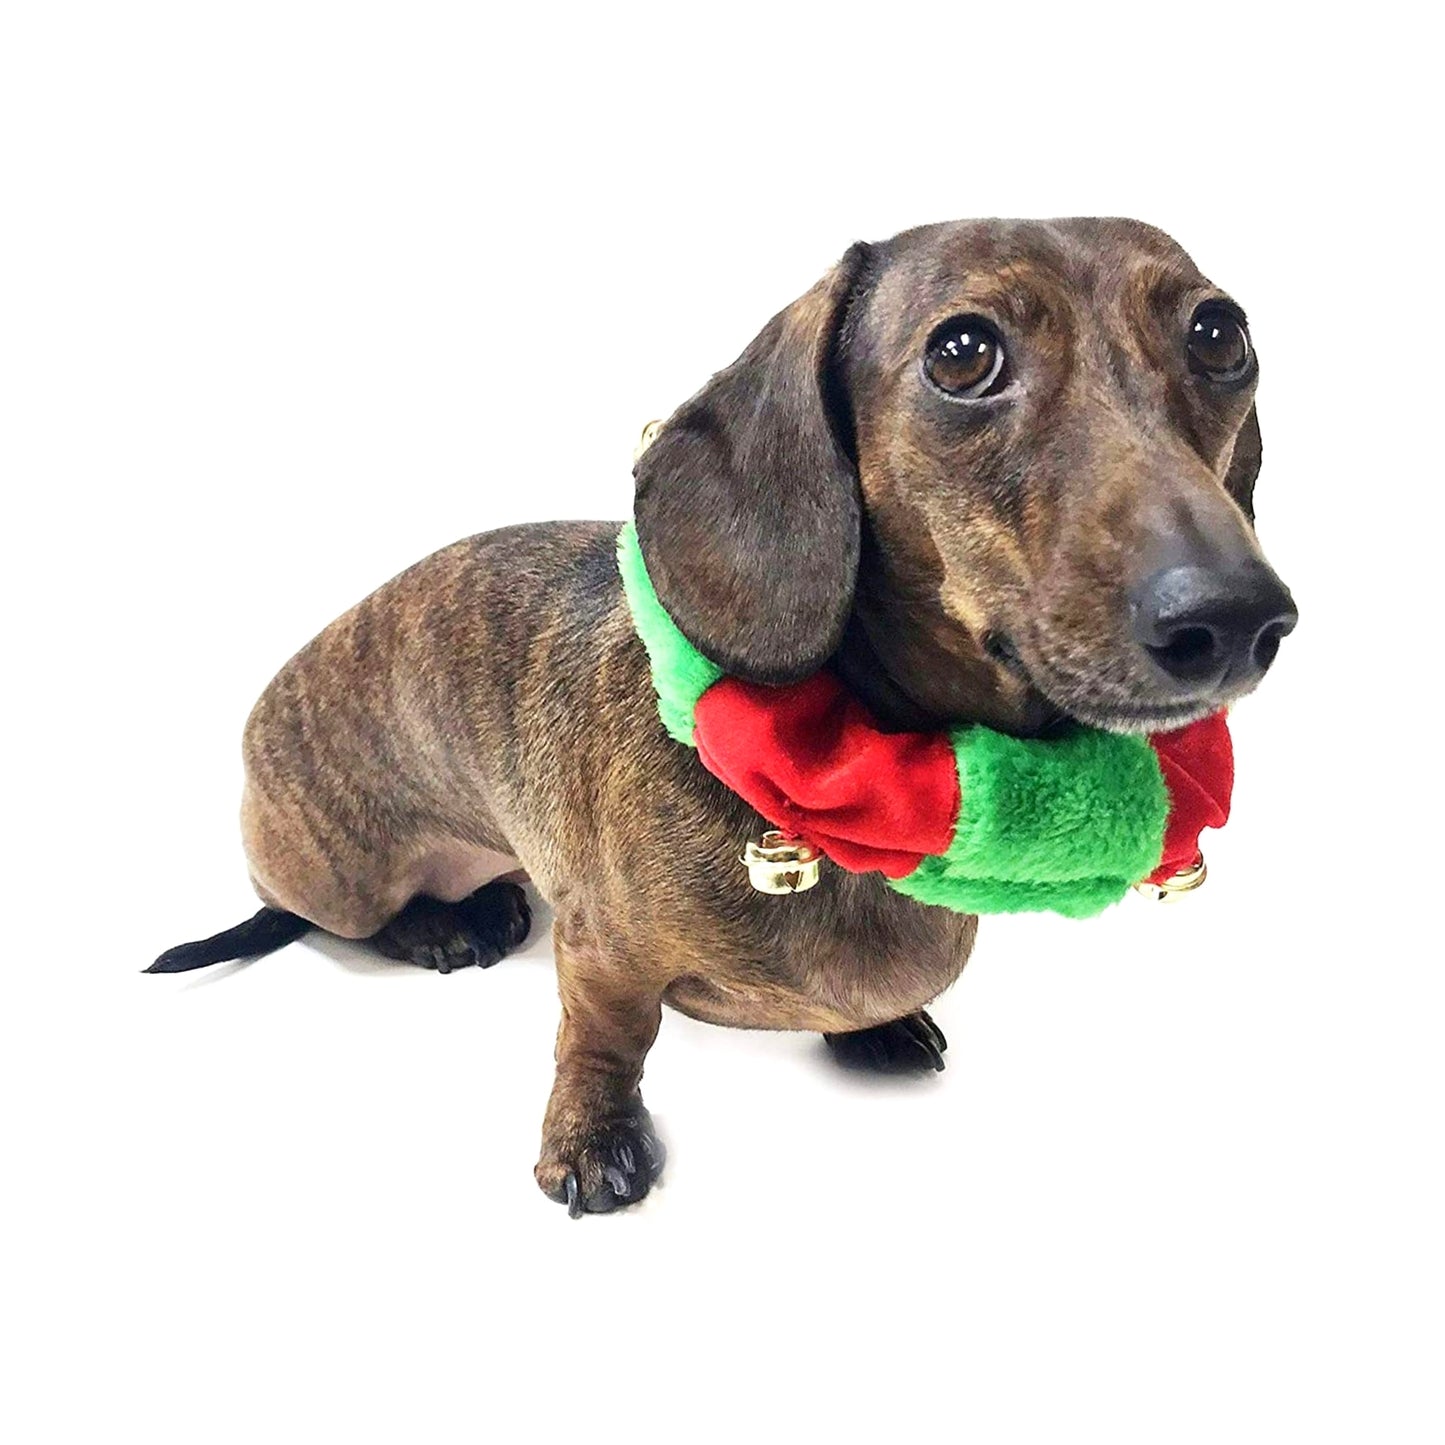 Midlee Red/Green Christmas Plush Bell Collar